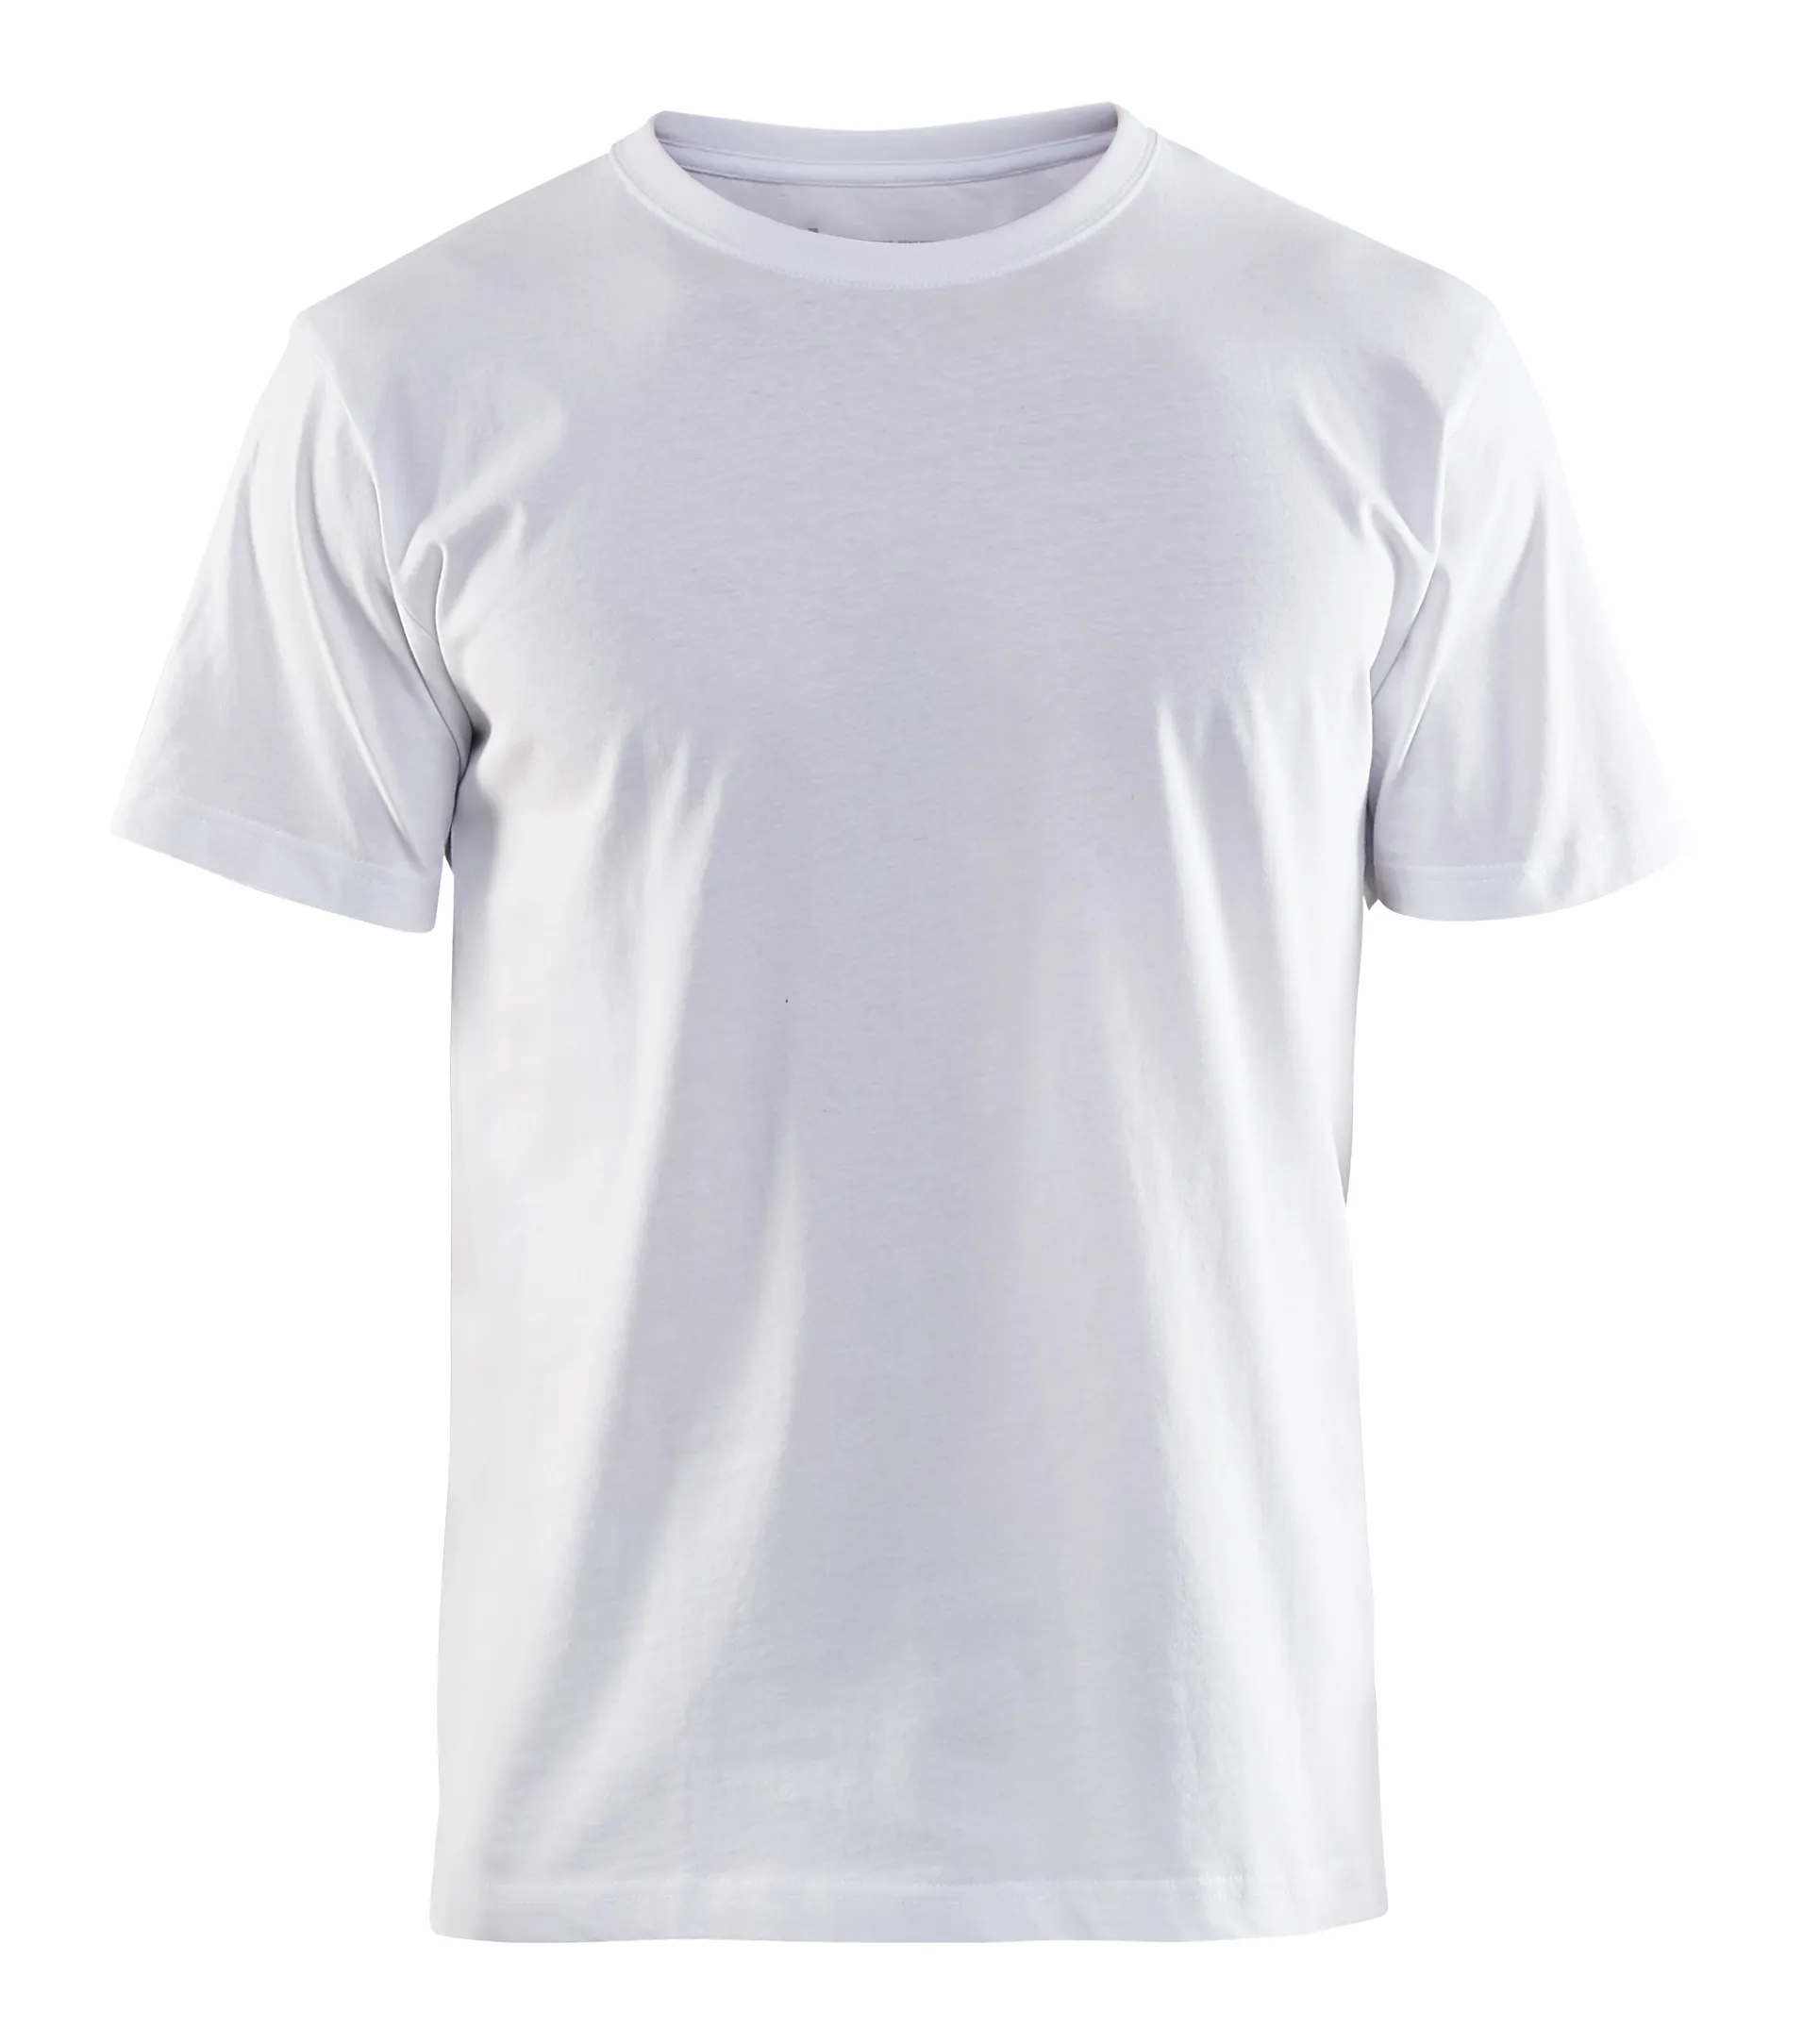 White Color Short Sleeve O Neck Plus Size Best Quality T-Shirts With Custom Design T Shirt For Men's From Bangladesh